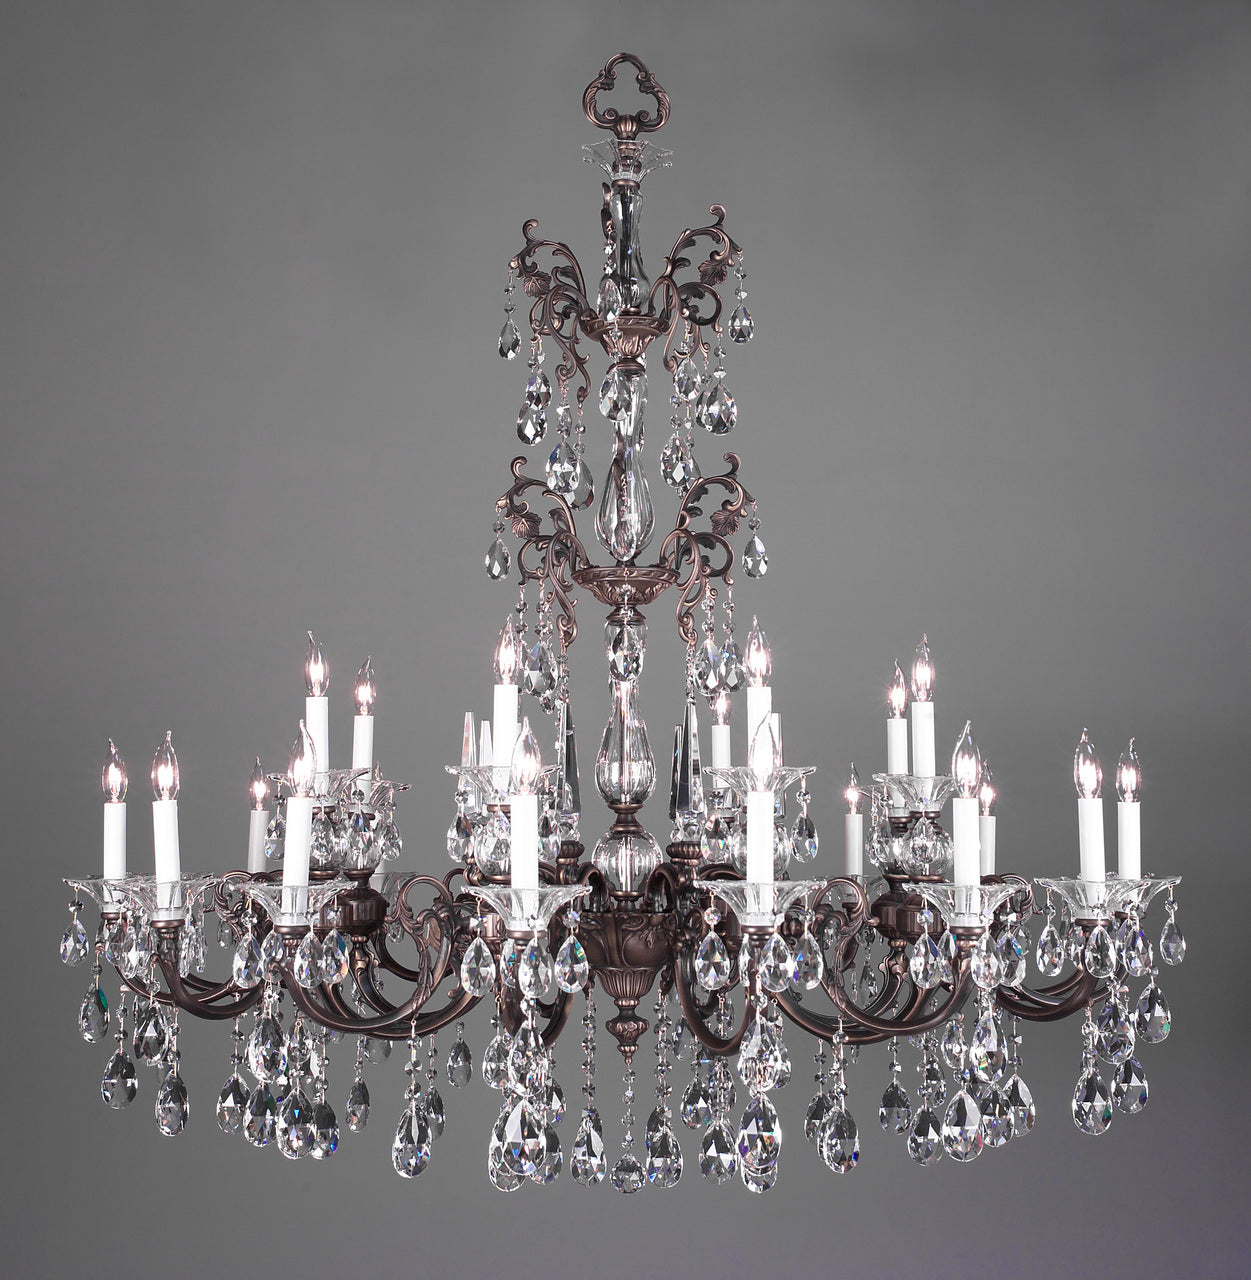 Classic Lighting 57065 SS S Via Lombardi Crystal Chandelier in Silverstone (Imported from Spain)